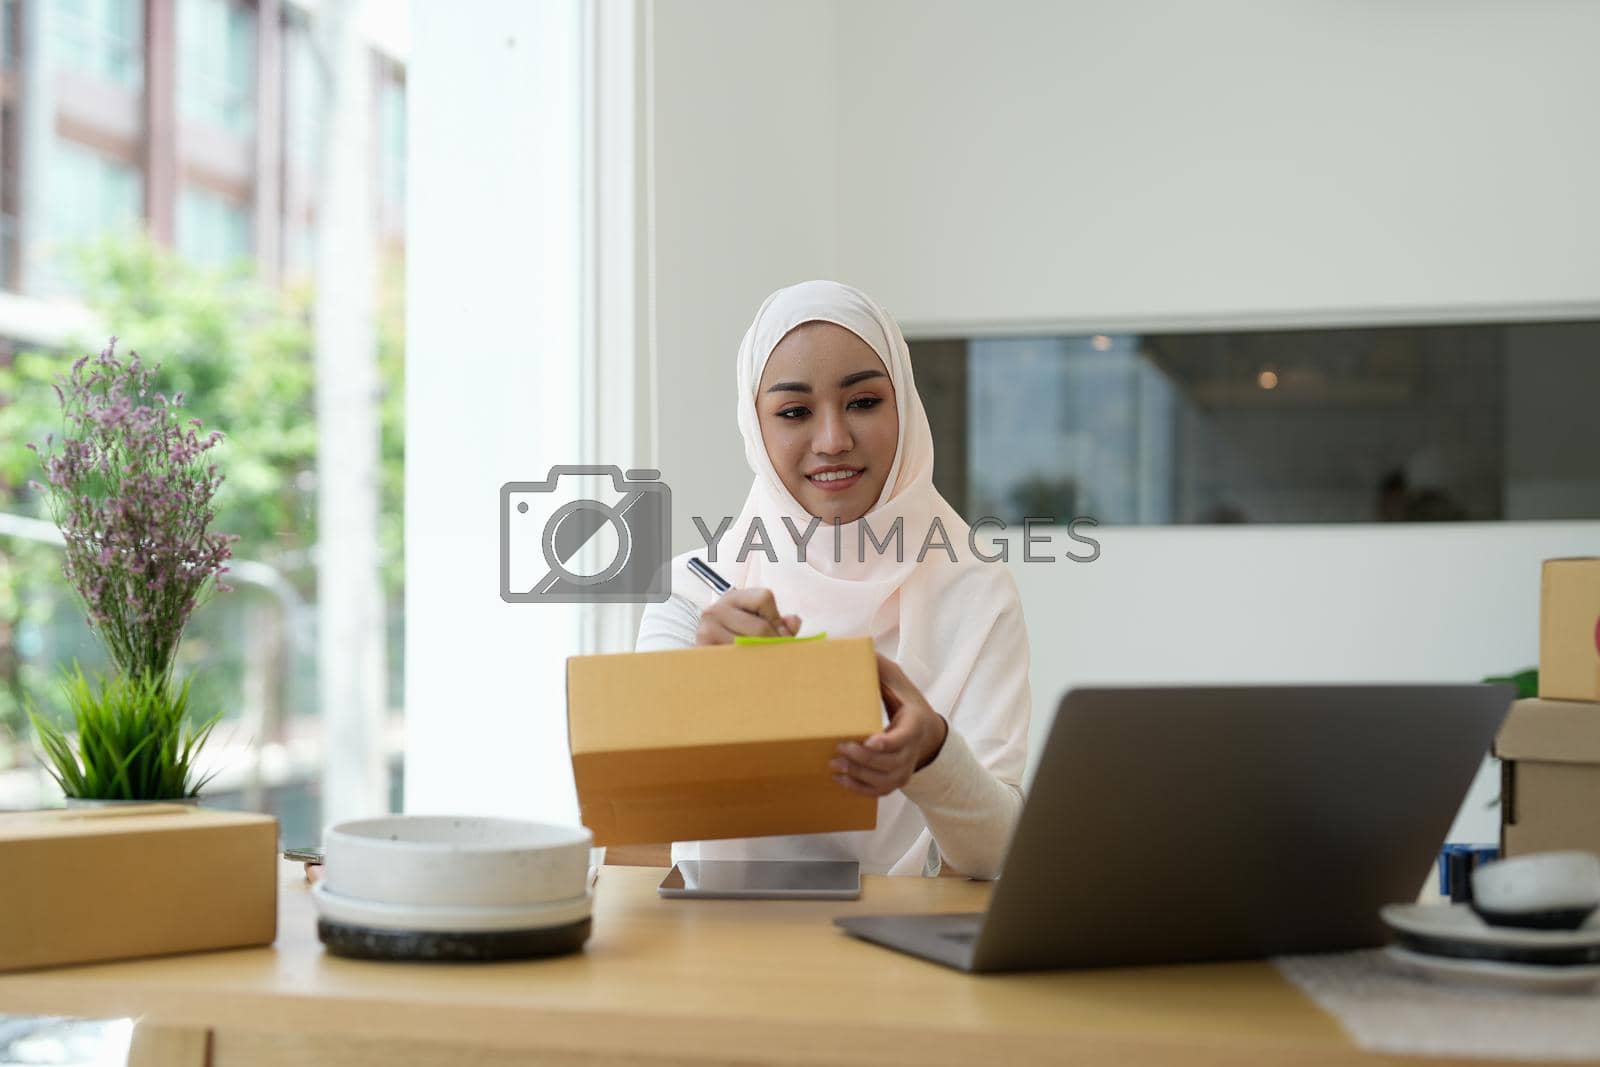 Royalty free image of Muslim female online store small business owner seller entrepreneur packing package post shipping box preparing delivery parcel on table. Ecommerce dropshipping shipment service concept. by nateemee